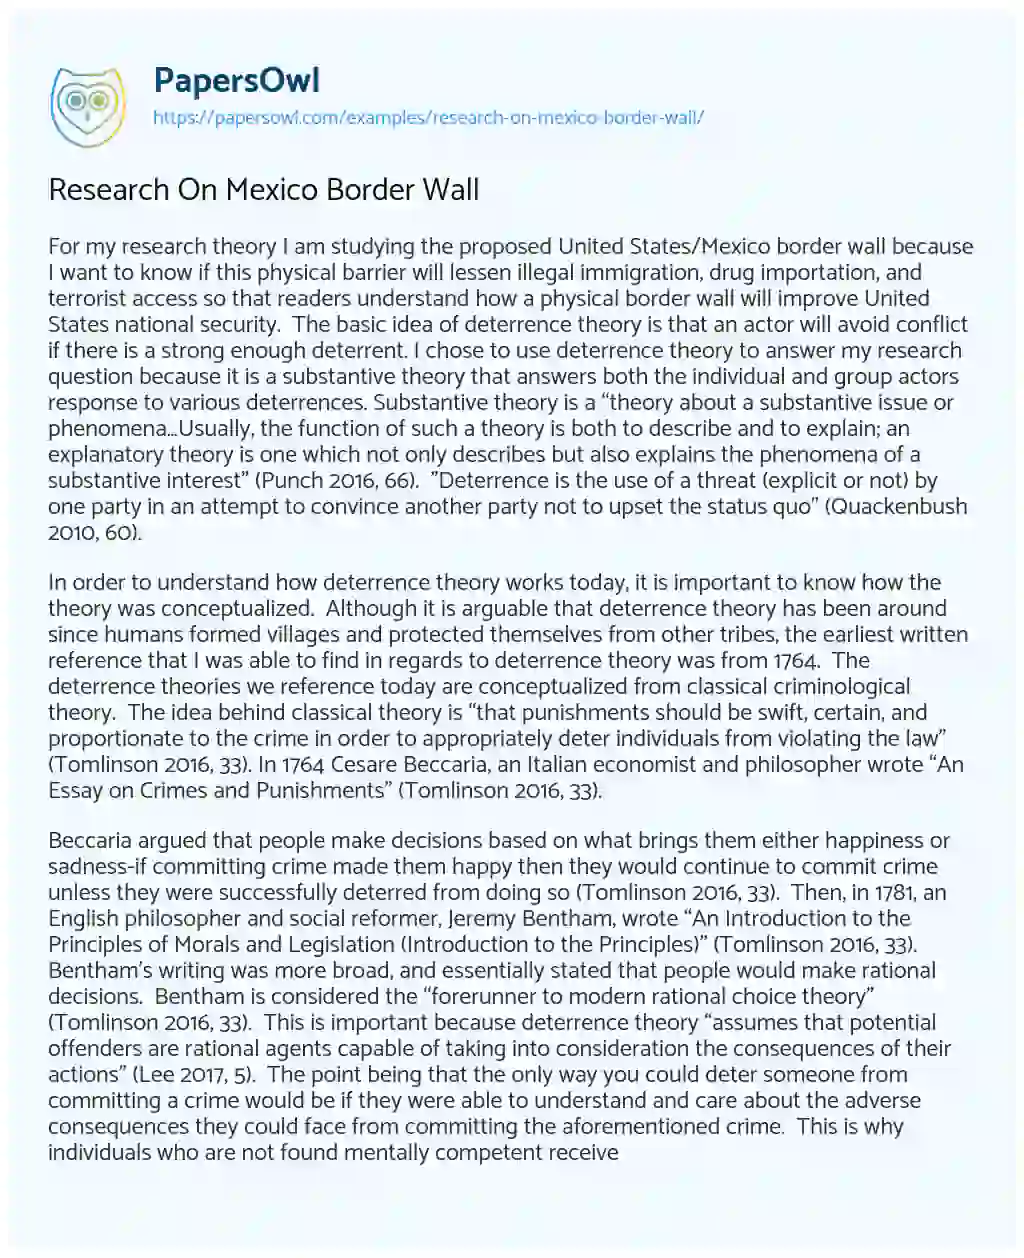 Essay on Research on Mexico Border Wall